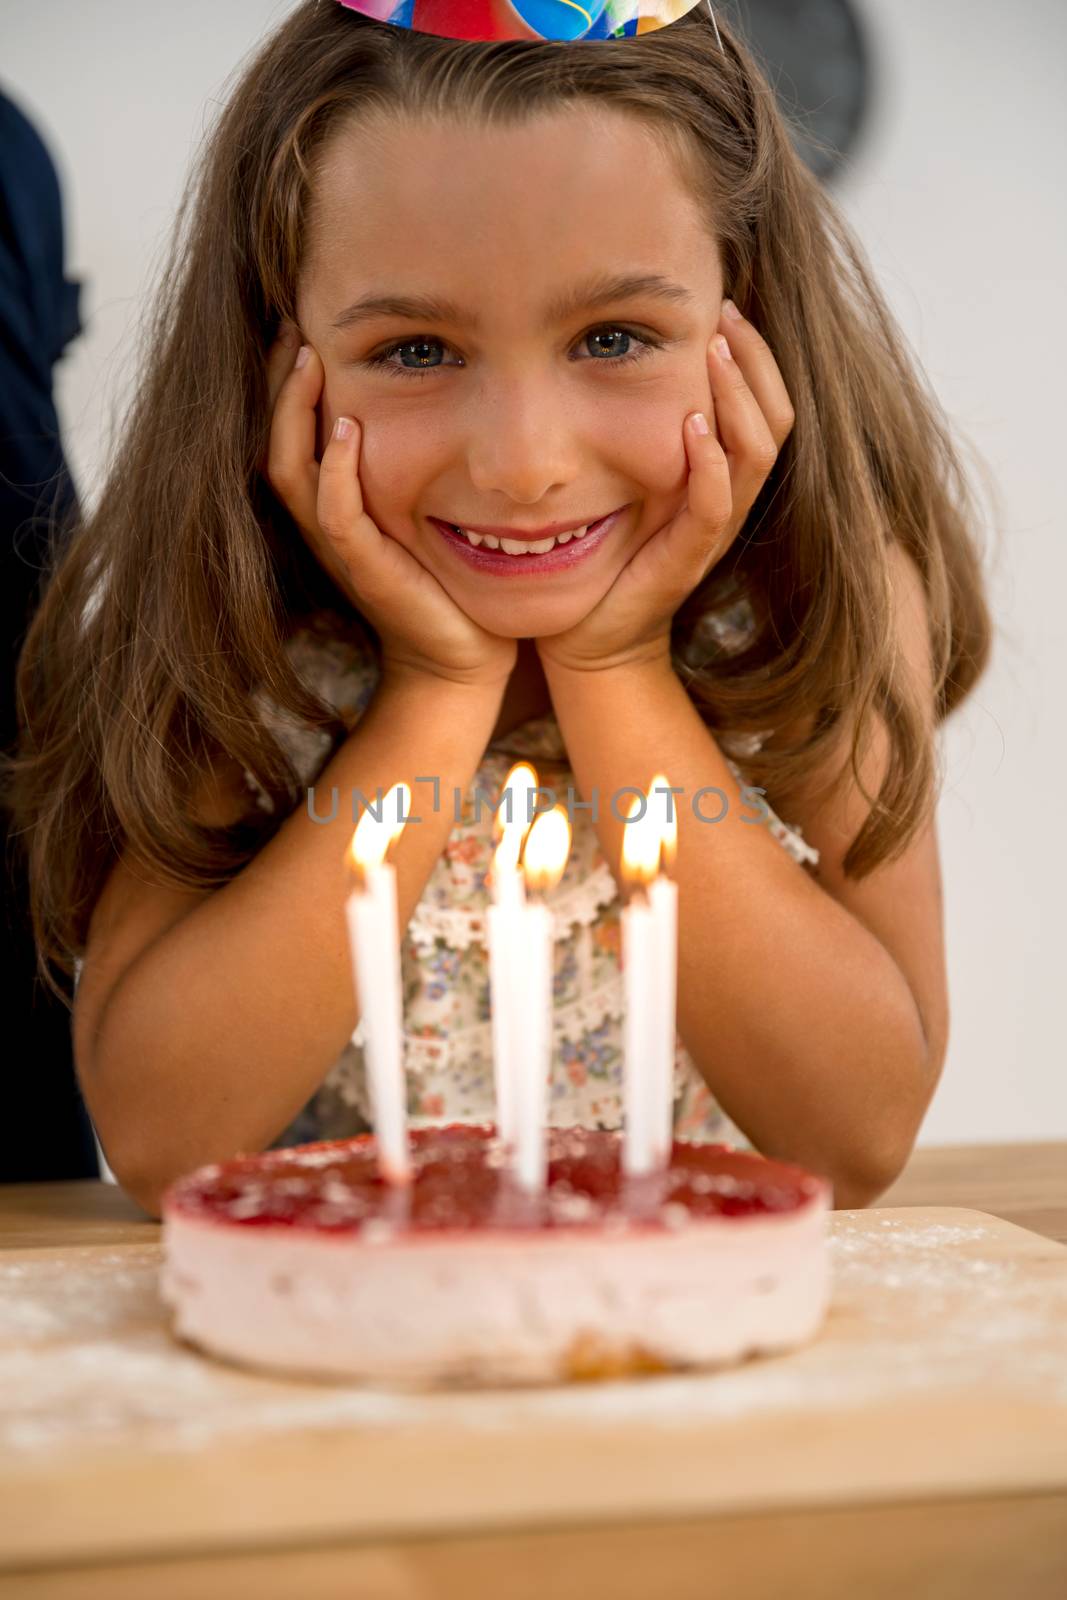 Shot of a happy young girl celebrating her birthday